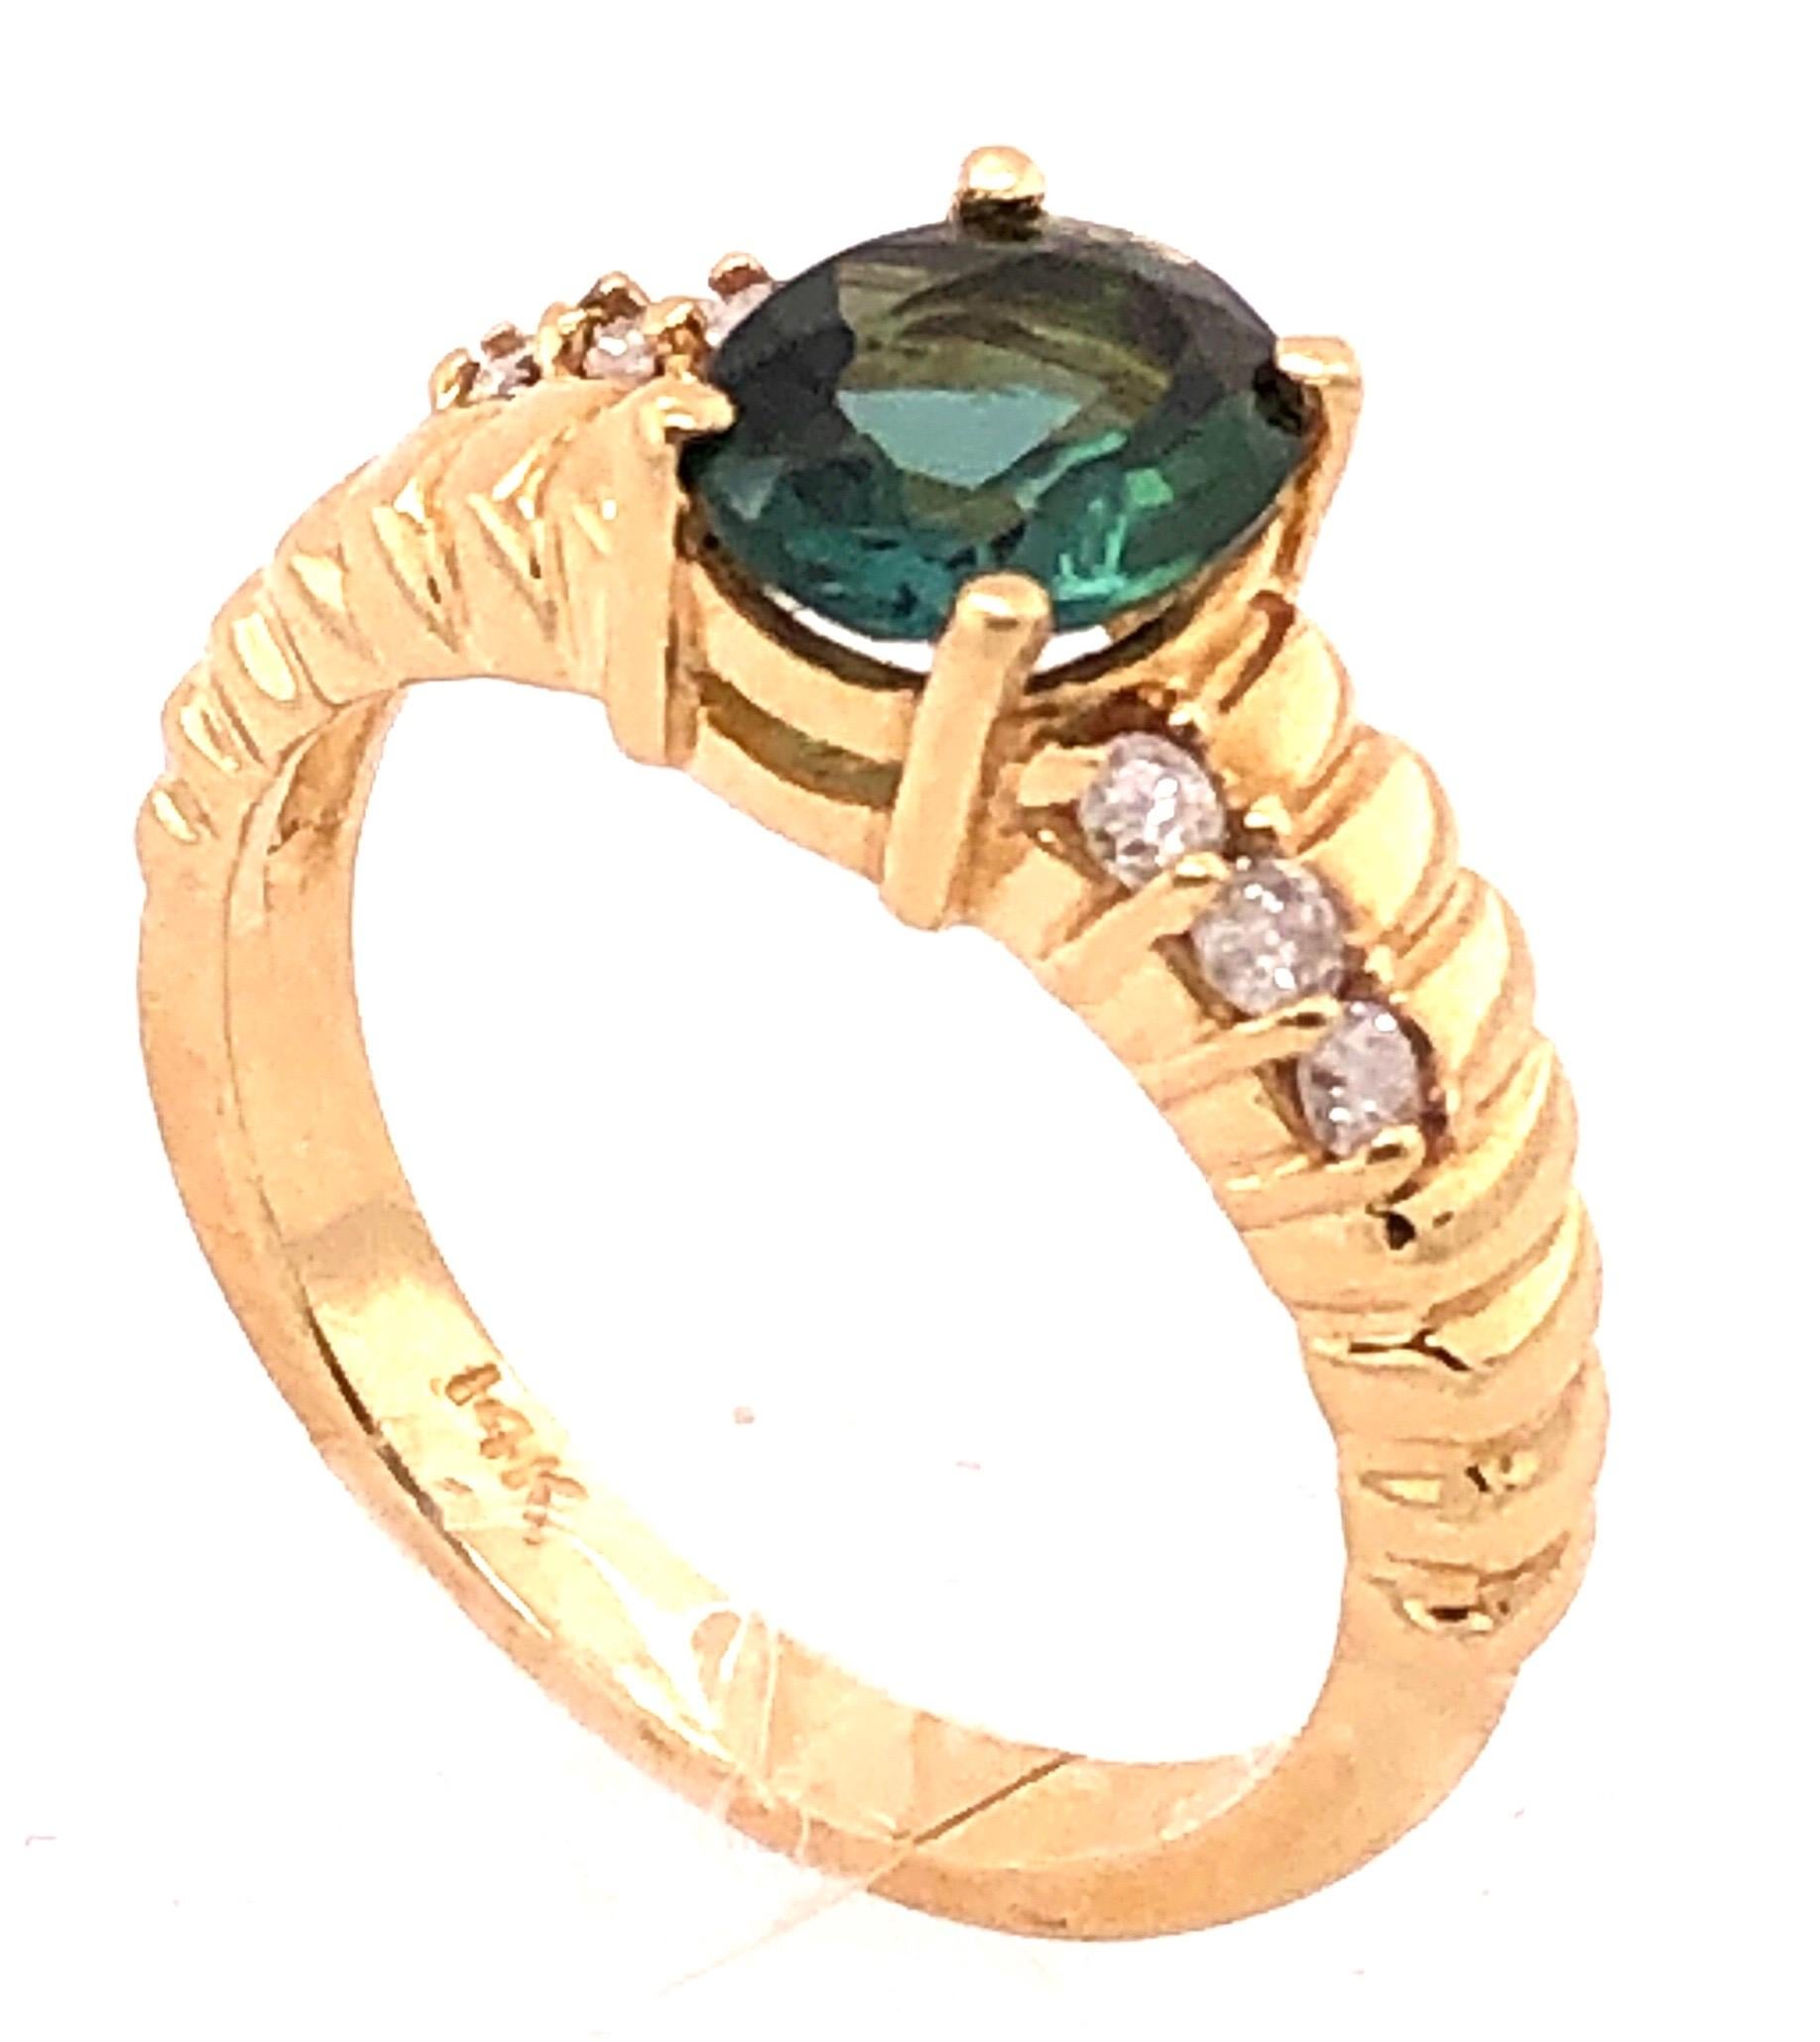 14 Karat Yellow Gold Green Topaz Solitaire Ring with Diamond Accents 0.30 TDW.
Size 5.5 
4 grams total weight.